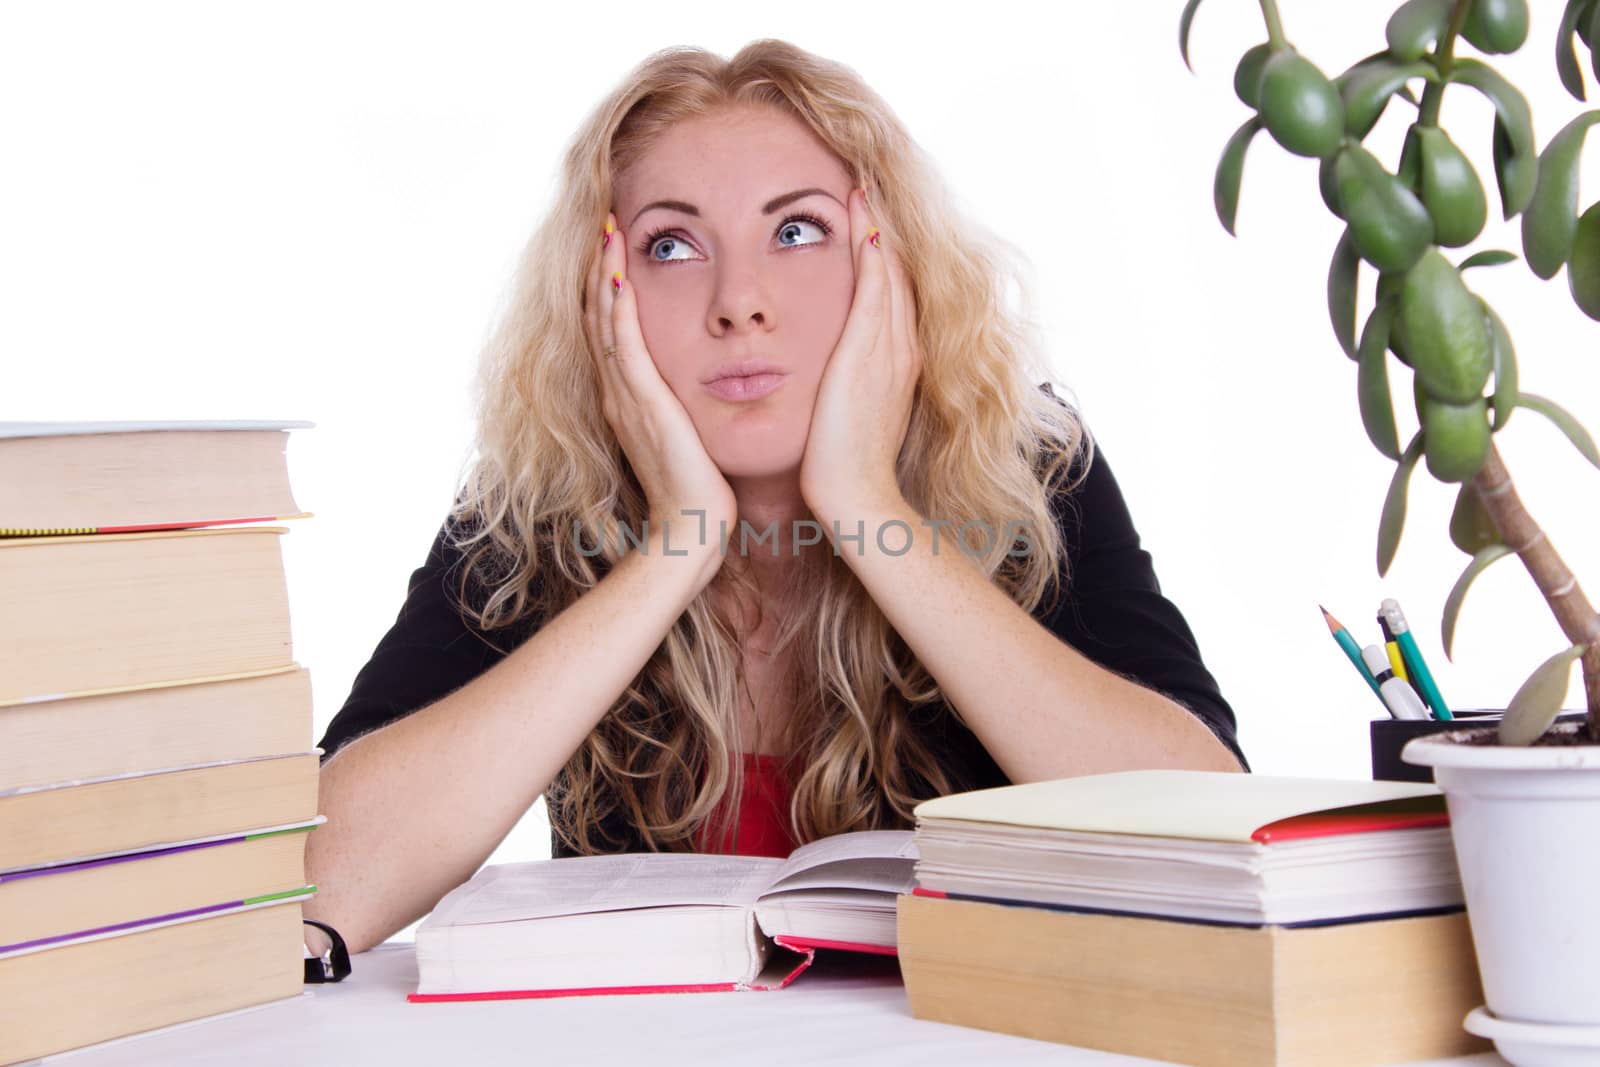 Oveworked student girl with pile of books isolated on white